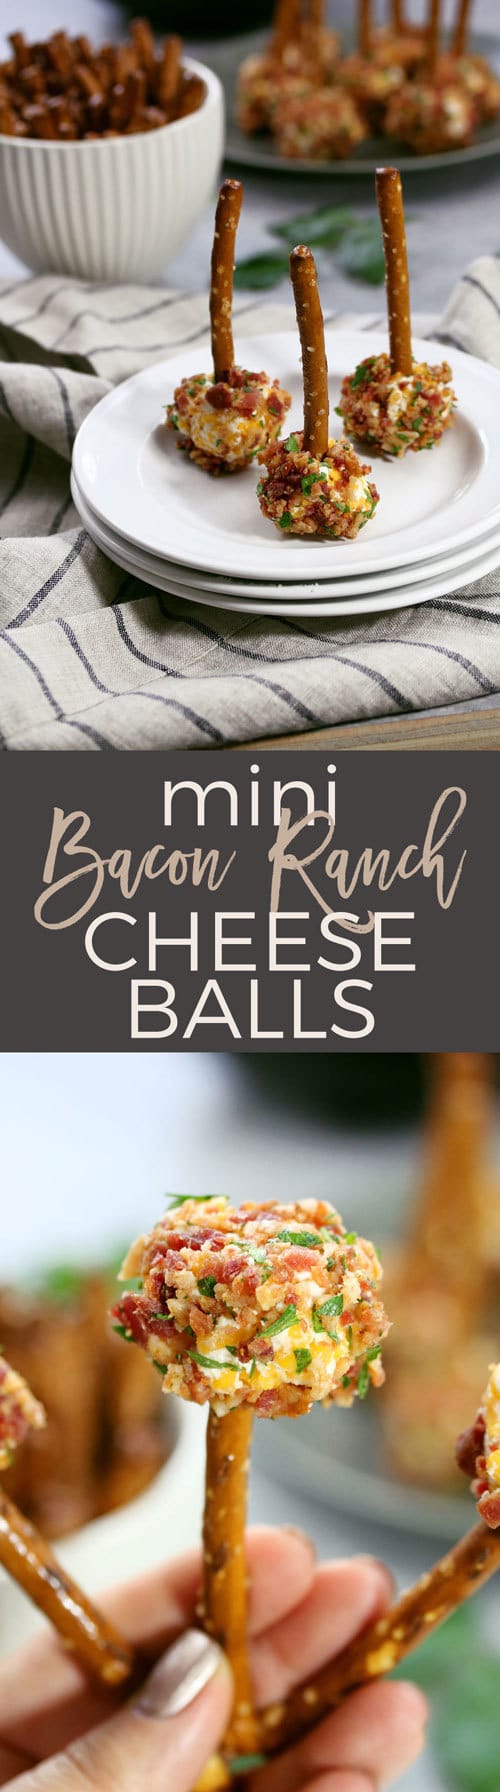 This mini bacon ranch cheese ball recipe is so easy to make and delicious! If you’re looking for game day recipes, this is the perfect appetizer! | honeyandbirch.com